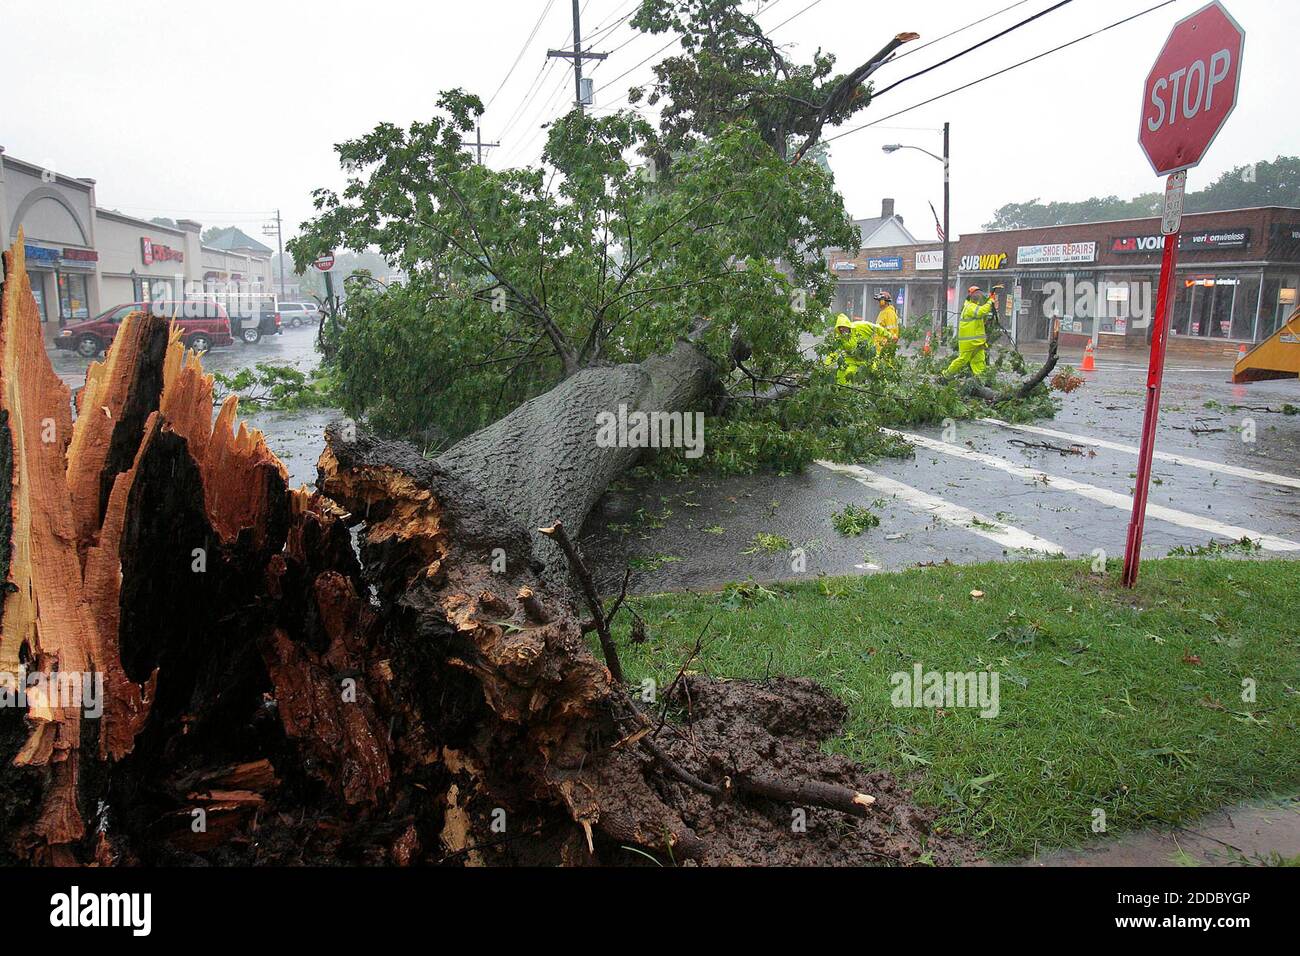 NO FILM, NO VIDEO, NO TV, NO DOCUMENTARY - City workers remove a downed tree Sunday August 28, 2011, located on Fair Lawn Avenue, in Fair Lawn, New Jersey after Hurricane Irene passed through the area. Photo by Mitsu Yasukawa/The Record/MCT/ABACAPRESS.COM Stock Photo